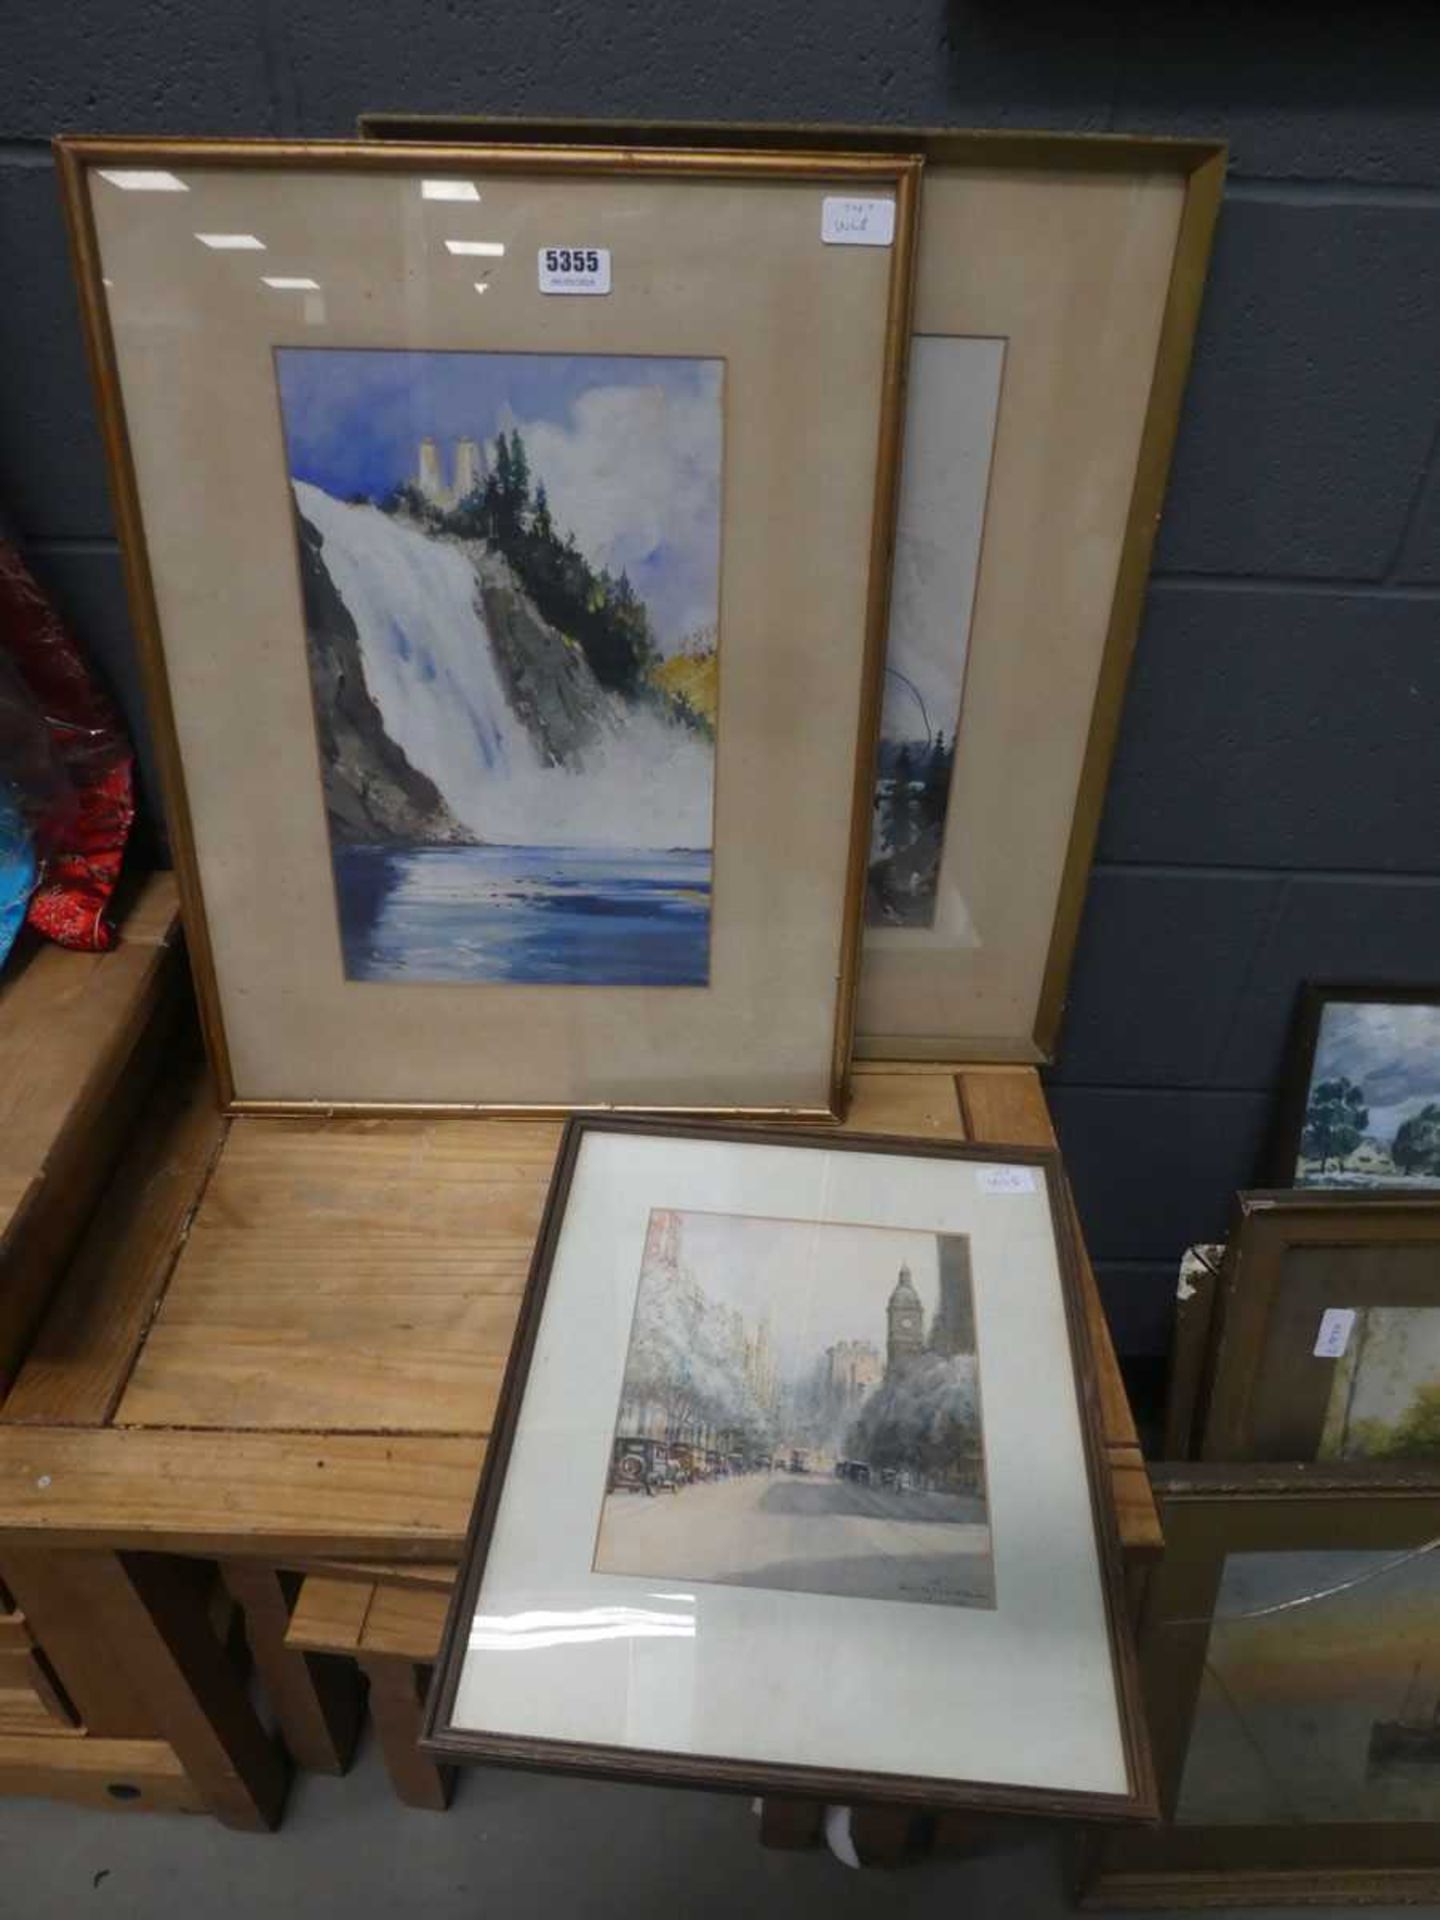 3 watercolours: cityscape, waterfall and snowy mountains